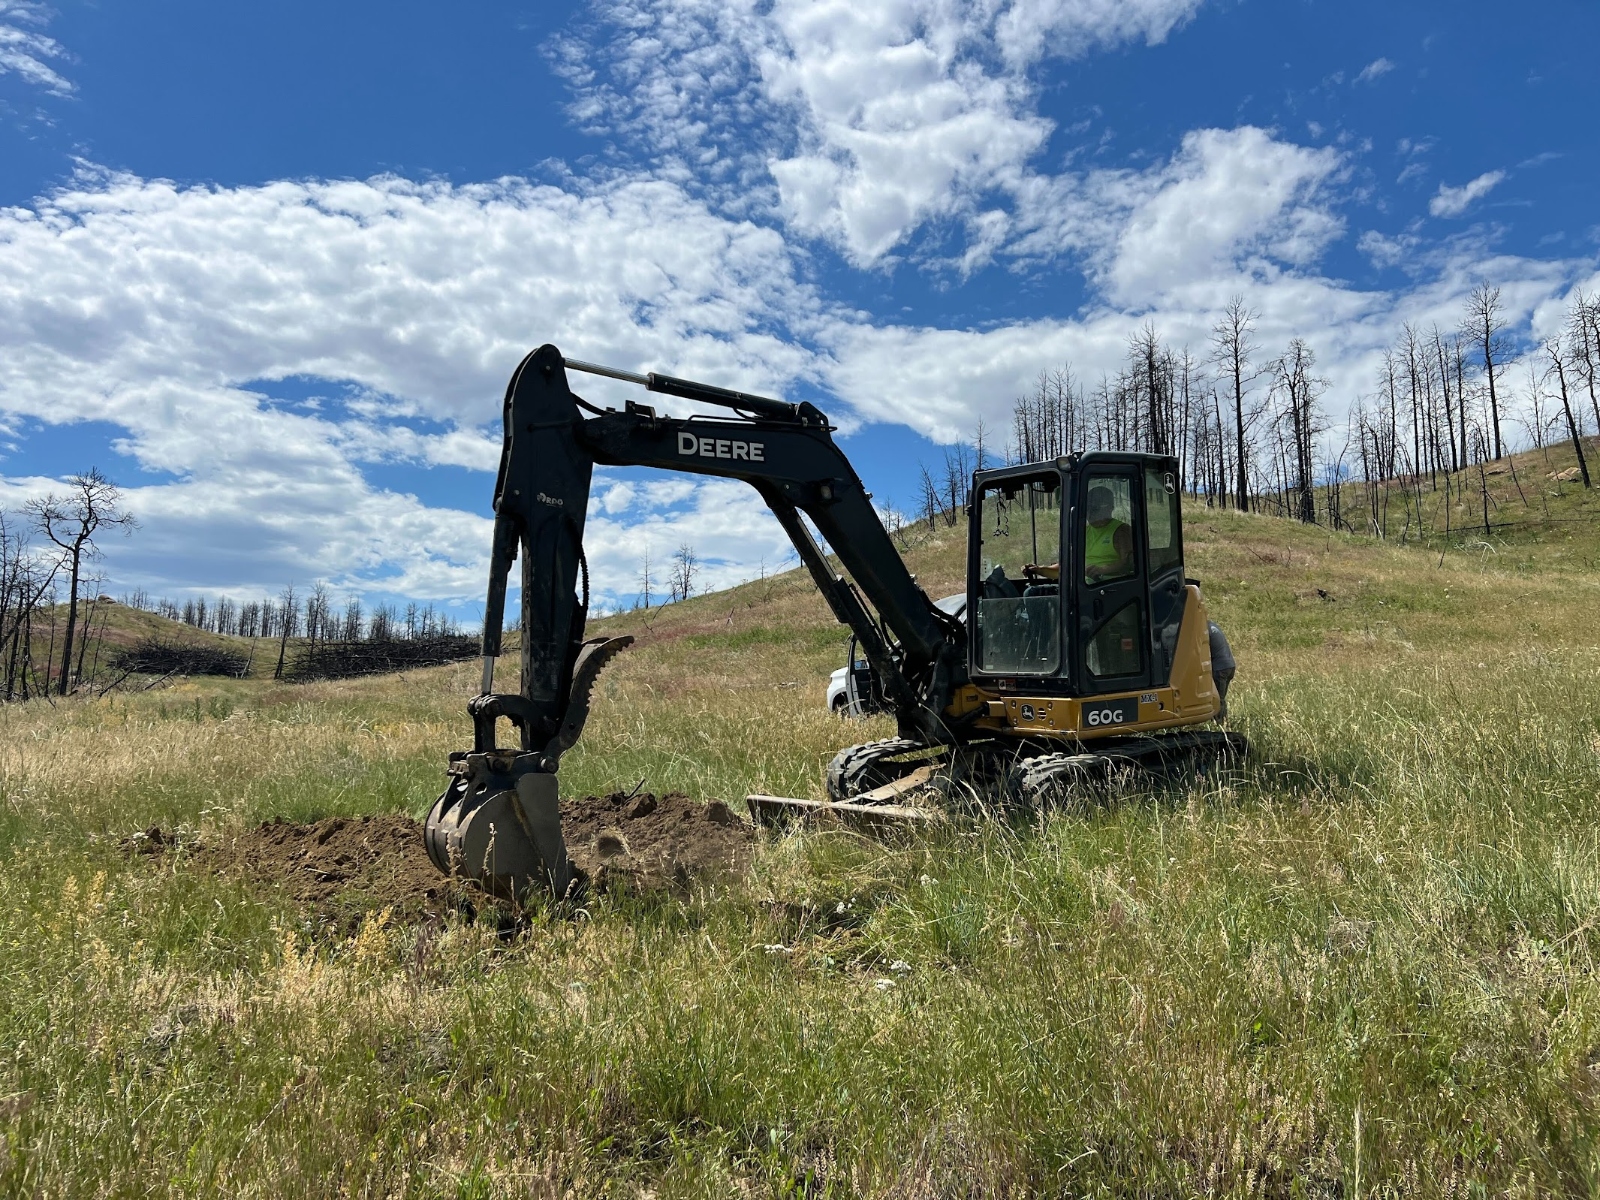 Heavy machinery prepares soil for a wood vaulting project in a grassy field